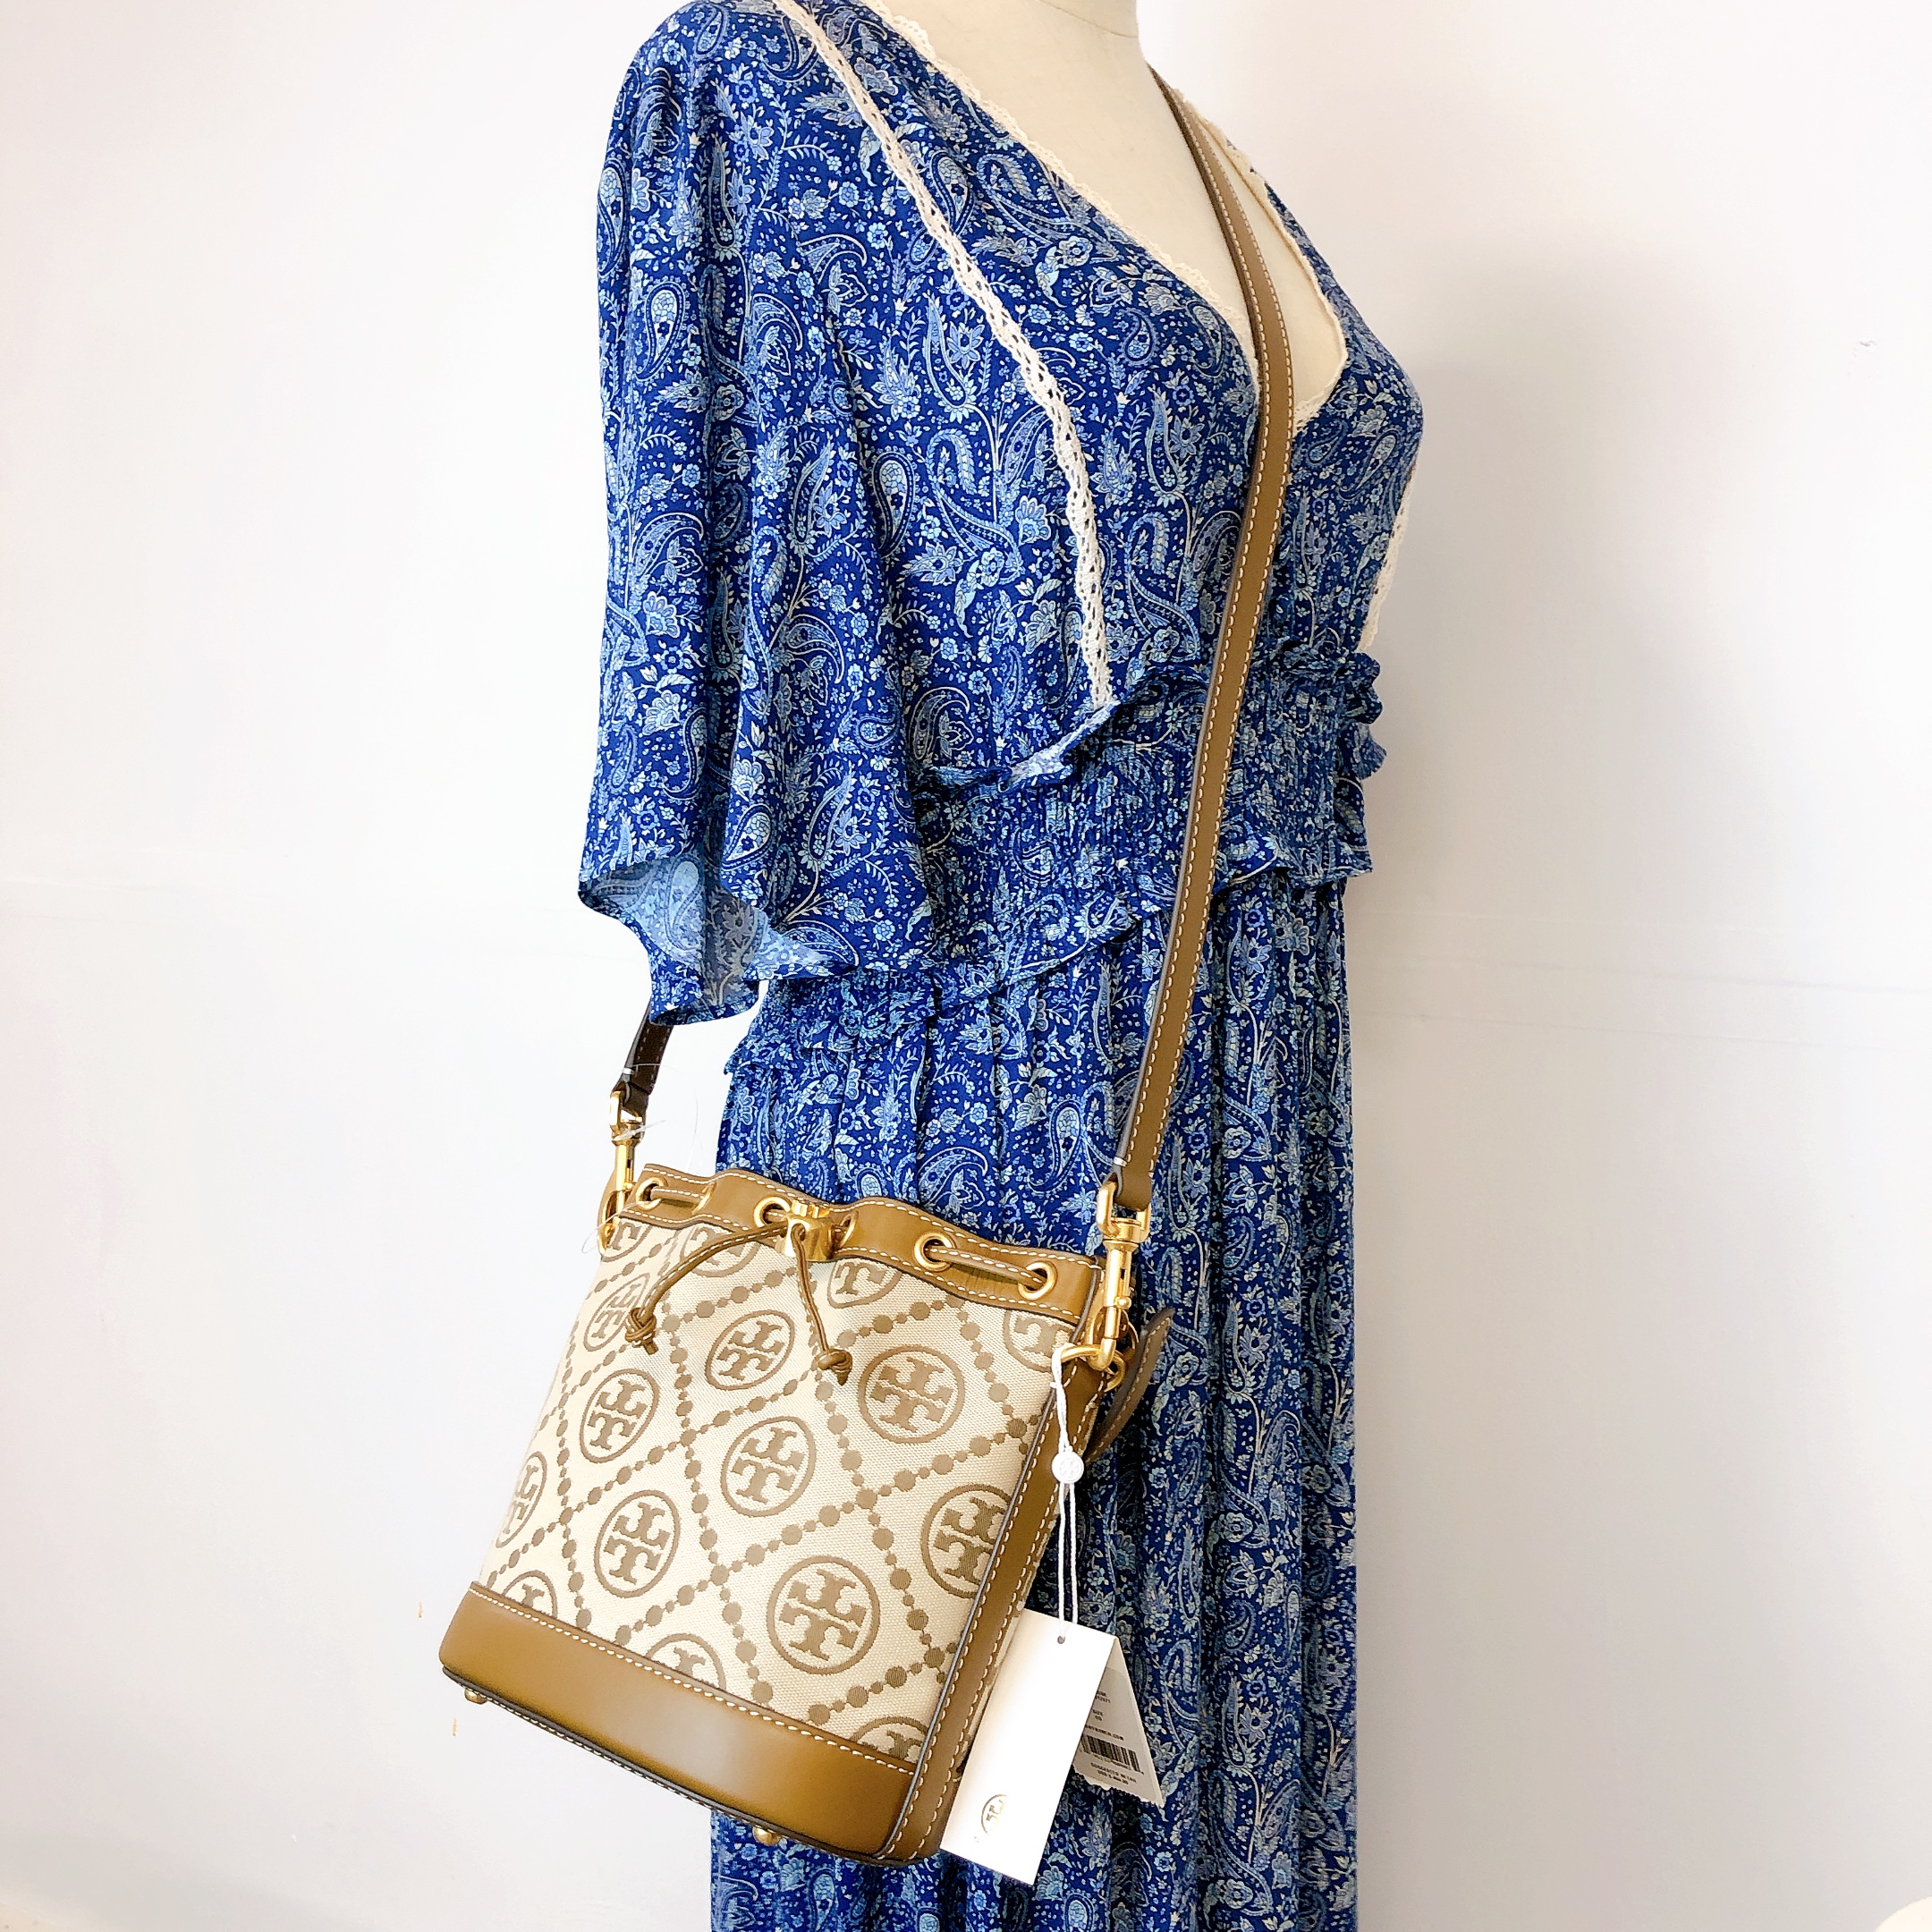 Tory Burch Brown Fabric and Leather Adalyn Bucket Bag Tory Burch